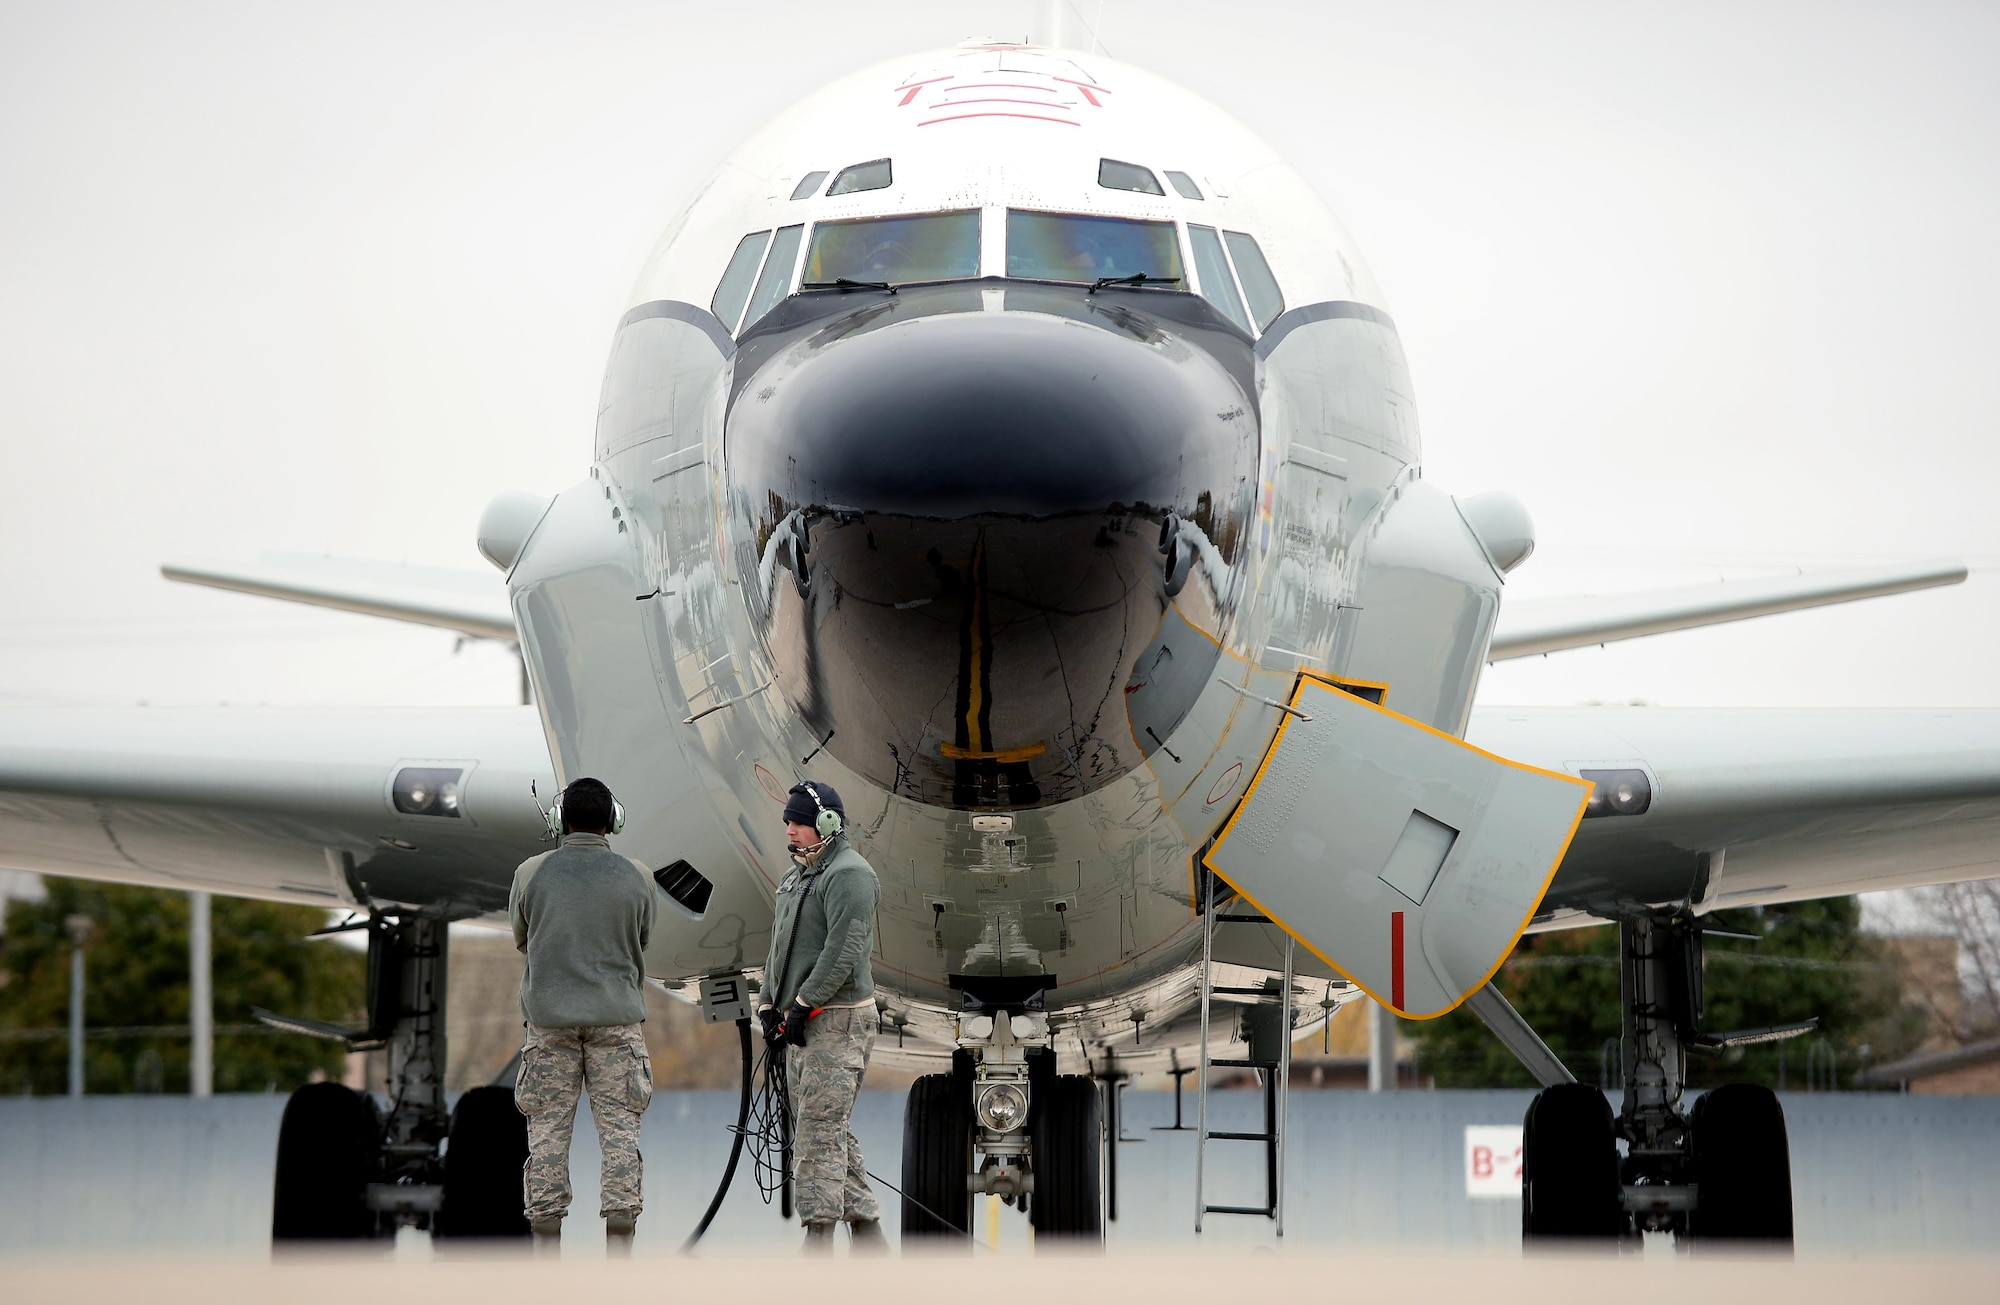 Staff Sgt. Riley Neads and Airman First Class Kejion Madden-Vaughn, crew chiefs with the 55th Maintenance Group, prepare to launch an RC-135 V/W Rivet Joint aircraft during Global Thunder 17, U.S. Strategic Command’s annual command post and field training exercise, Oct. 30, 2016, at Offutt Air Force Base, Neb. The exercise provided training opportunities for USSTRATCOM-tasked components, task forces, units and command posts to deter and, if necessary, defeat a military attack against the United States and to employ forces as directed by the President. (U.S. Air Force Photo by Delanie Stafford)